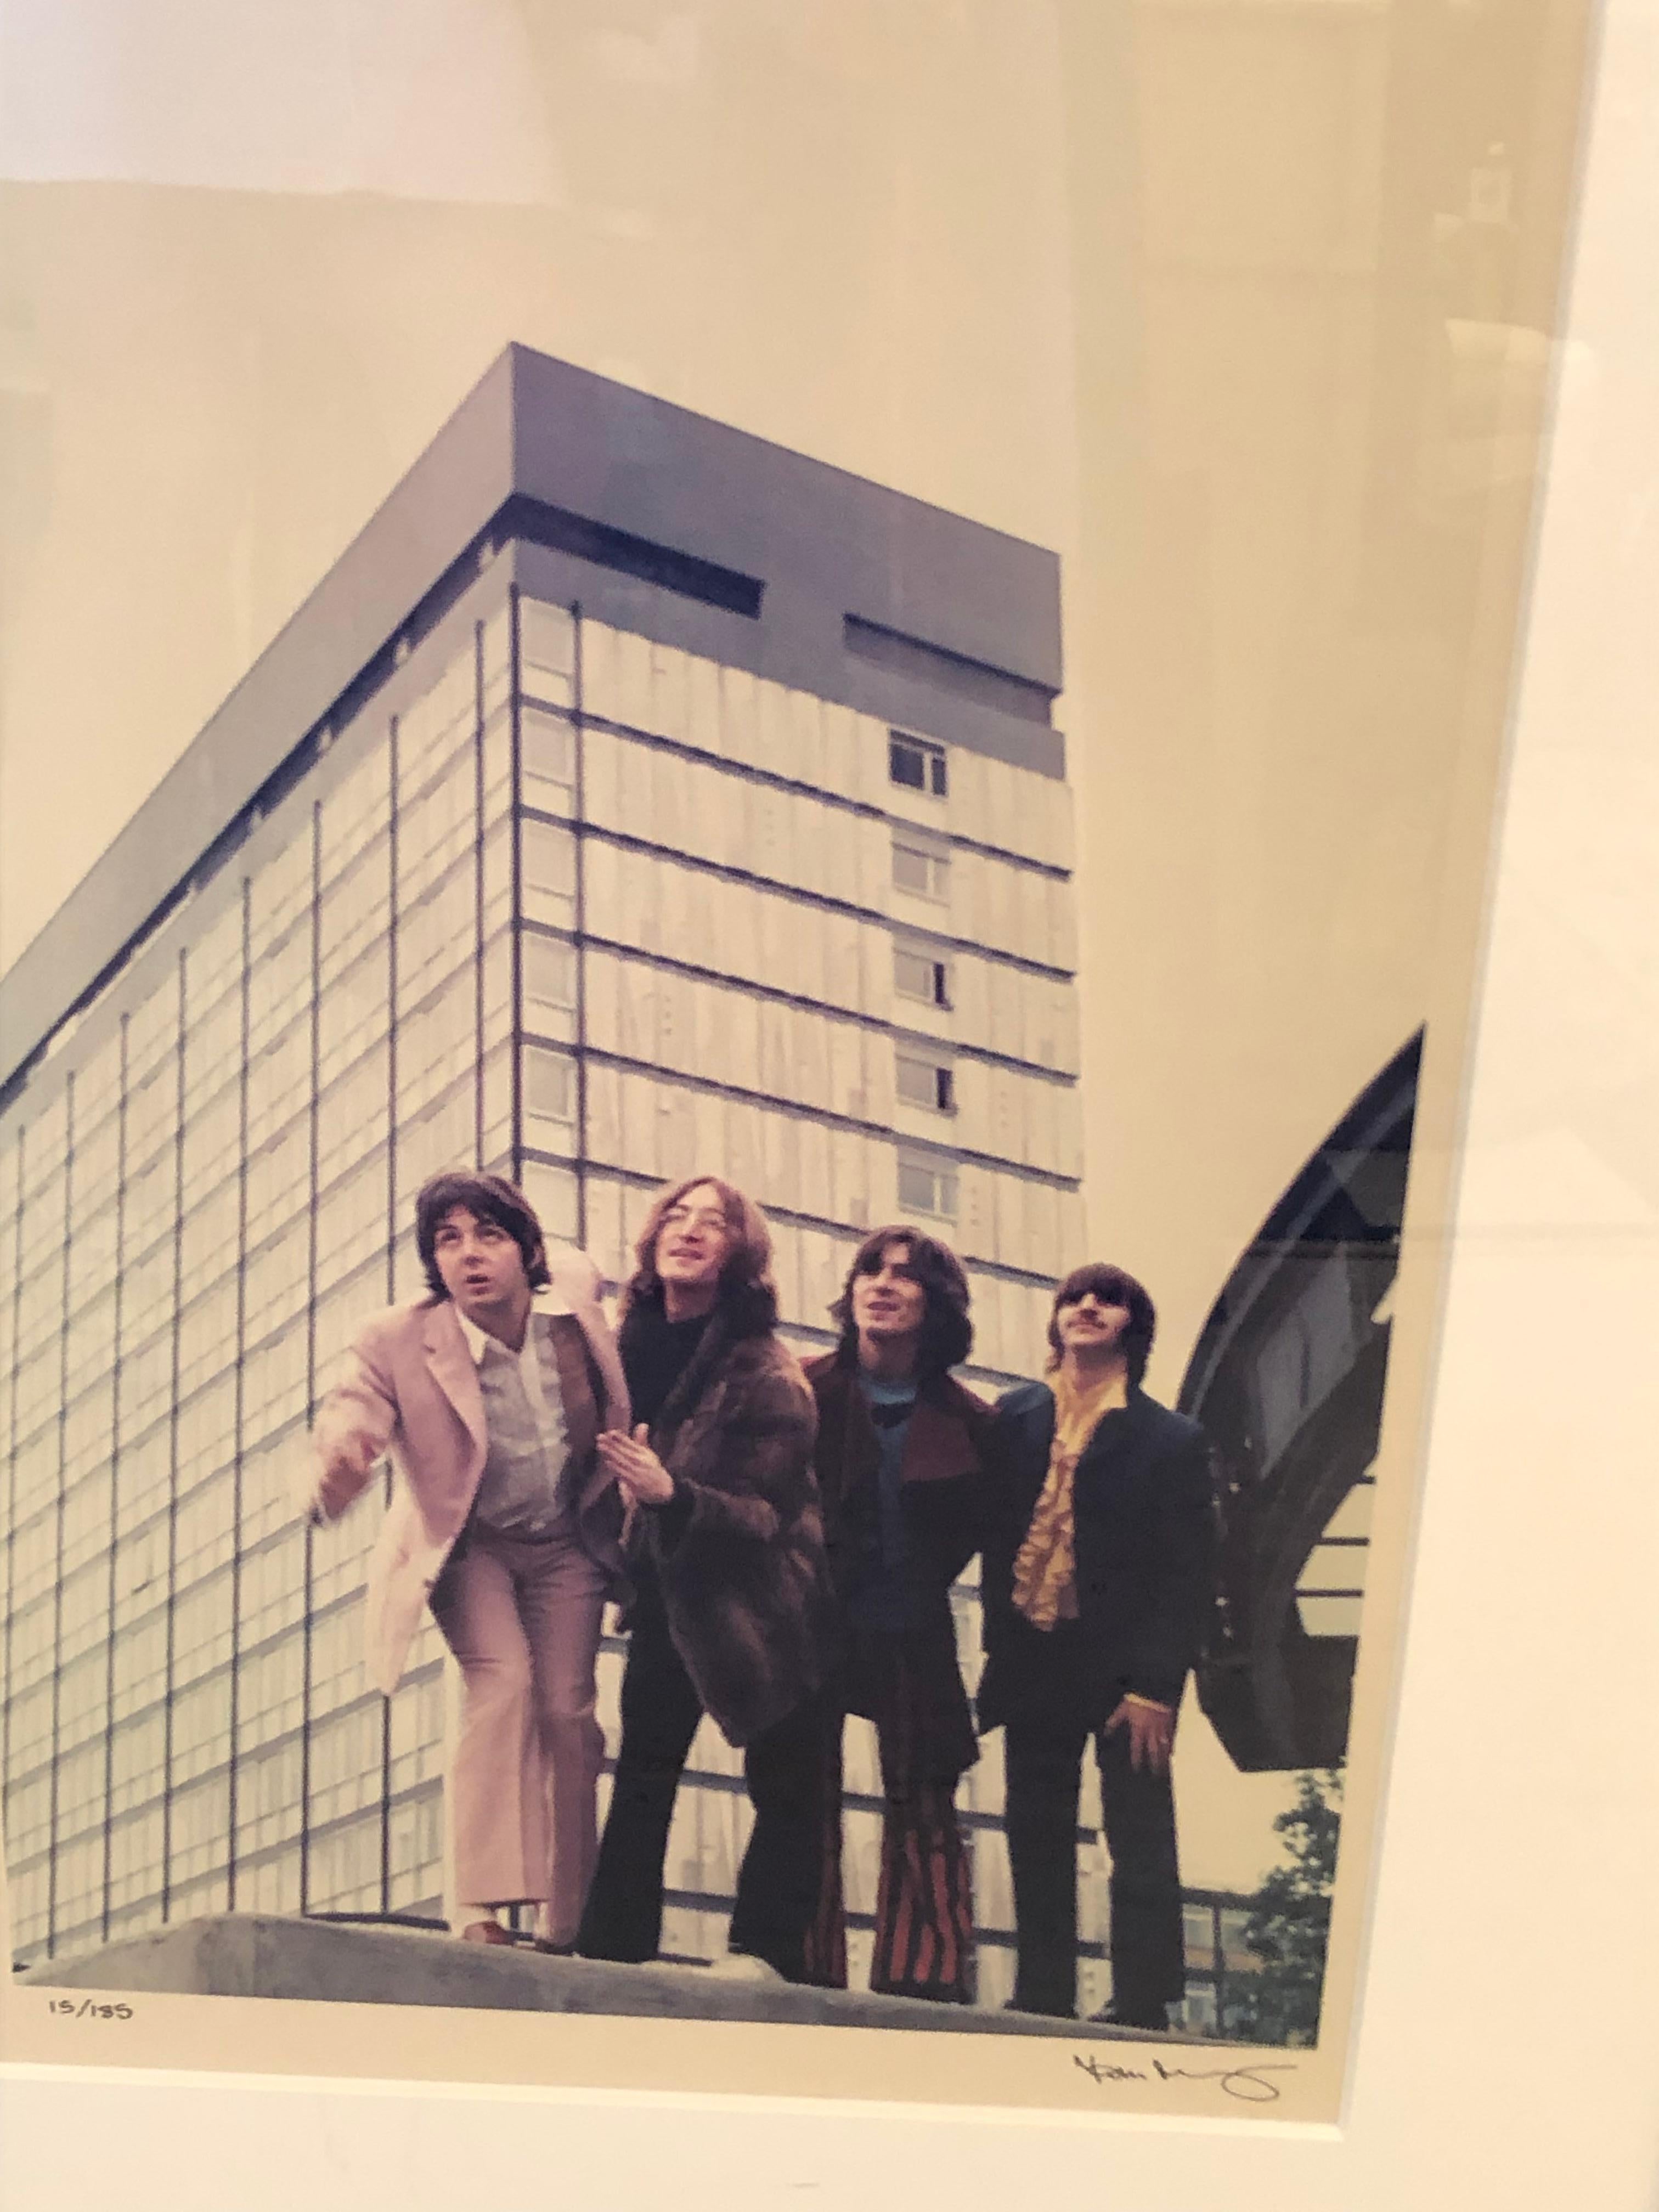 Paper Iconic Limited Edition Signed Tom Murray Art Photograph of The Beatles